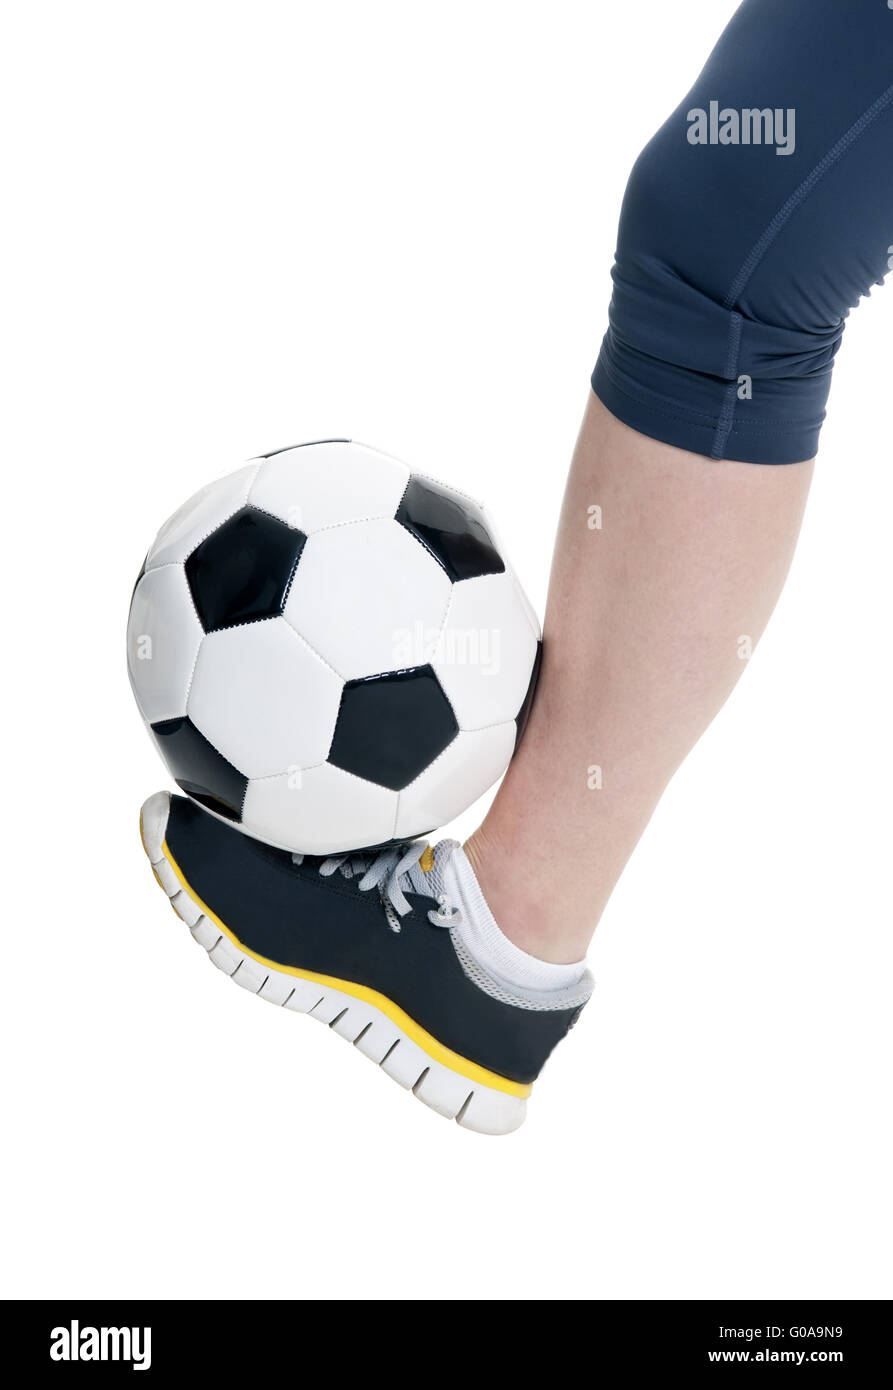 foot with soccer ball Stock Photo